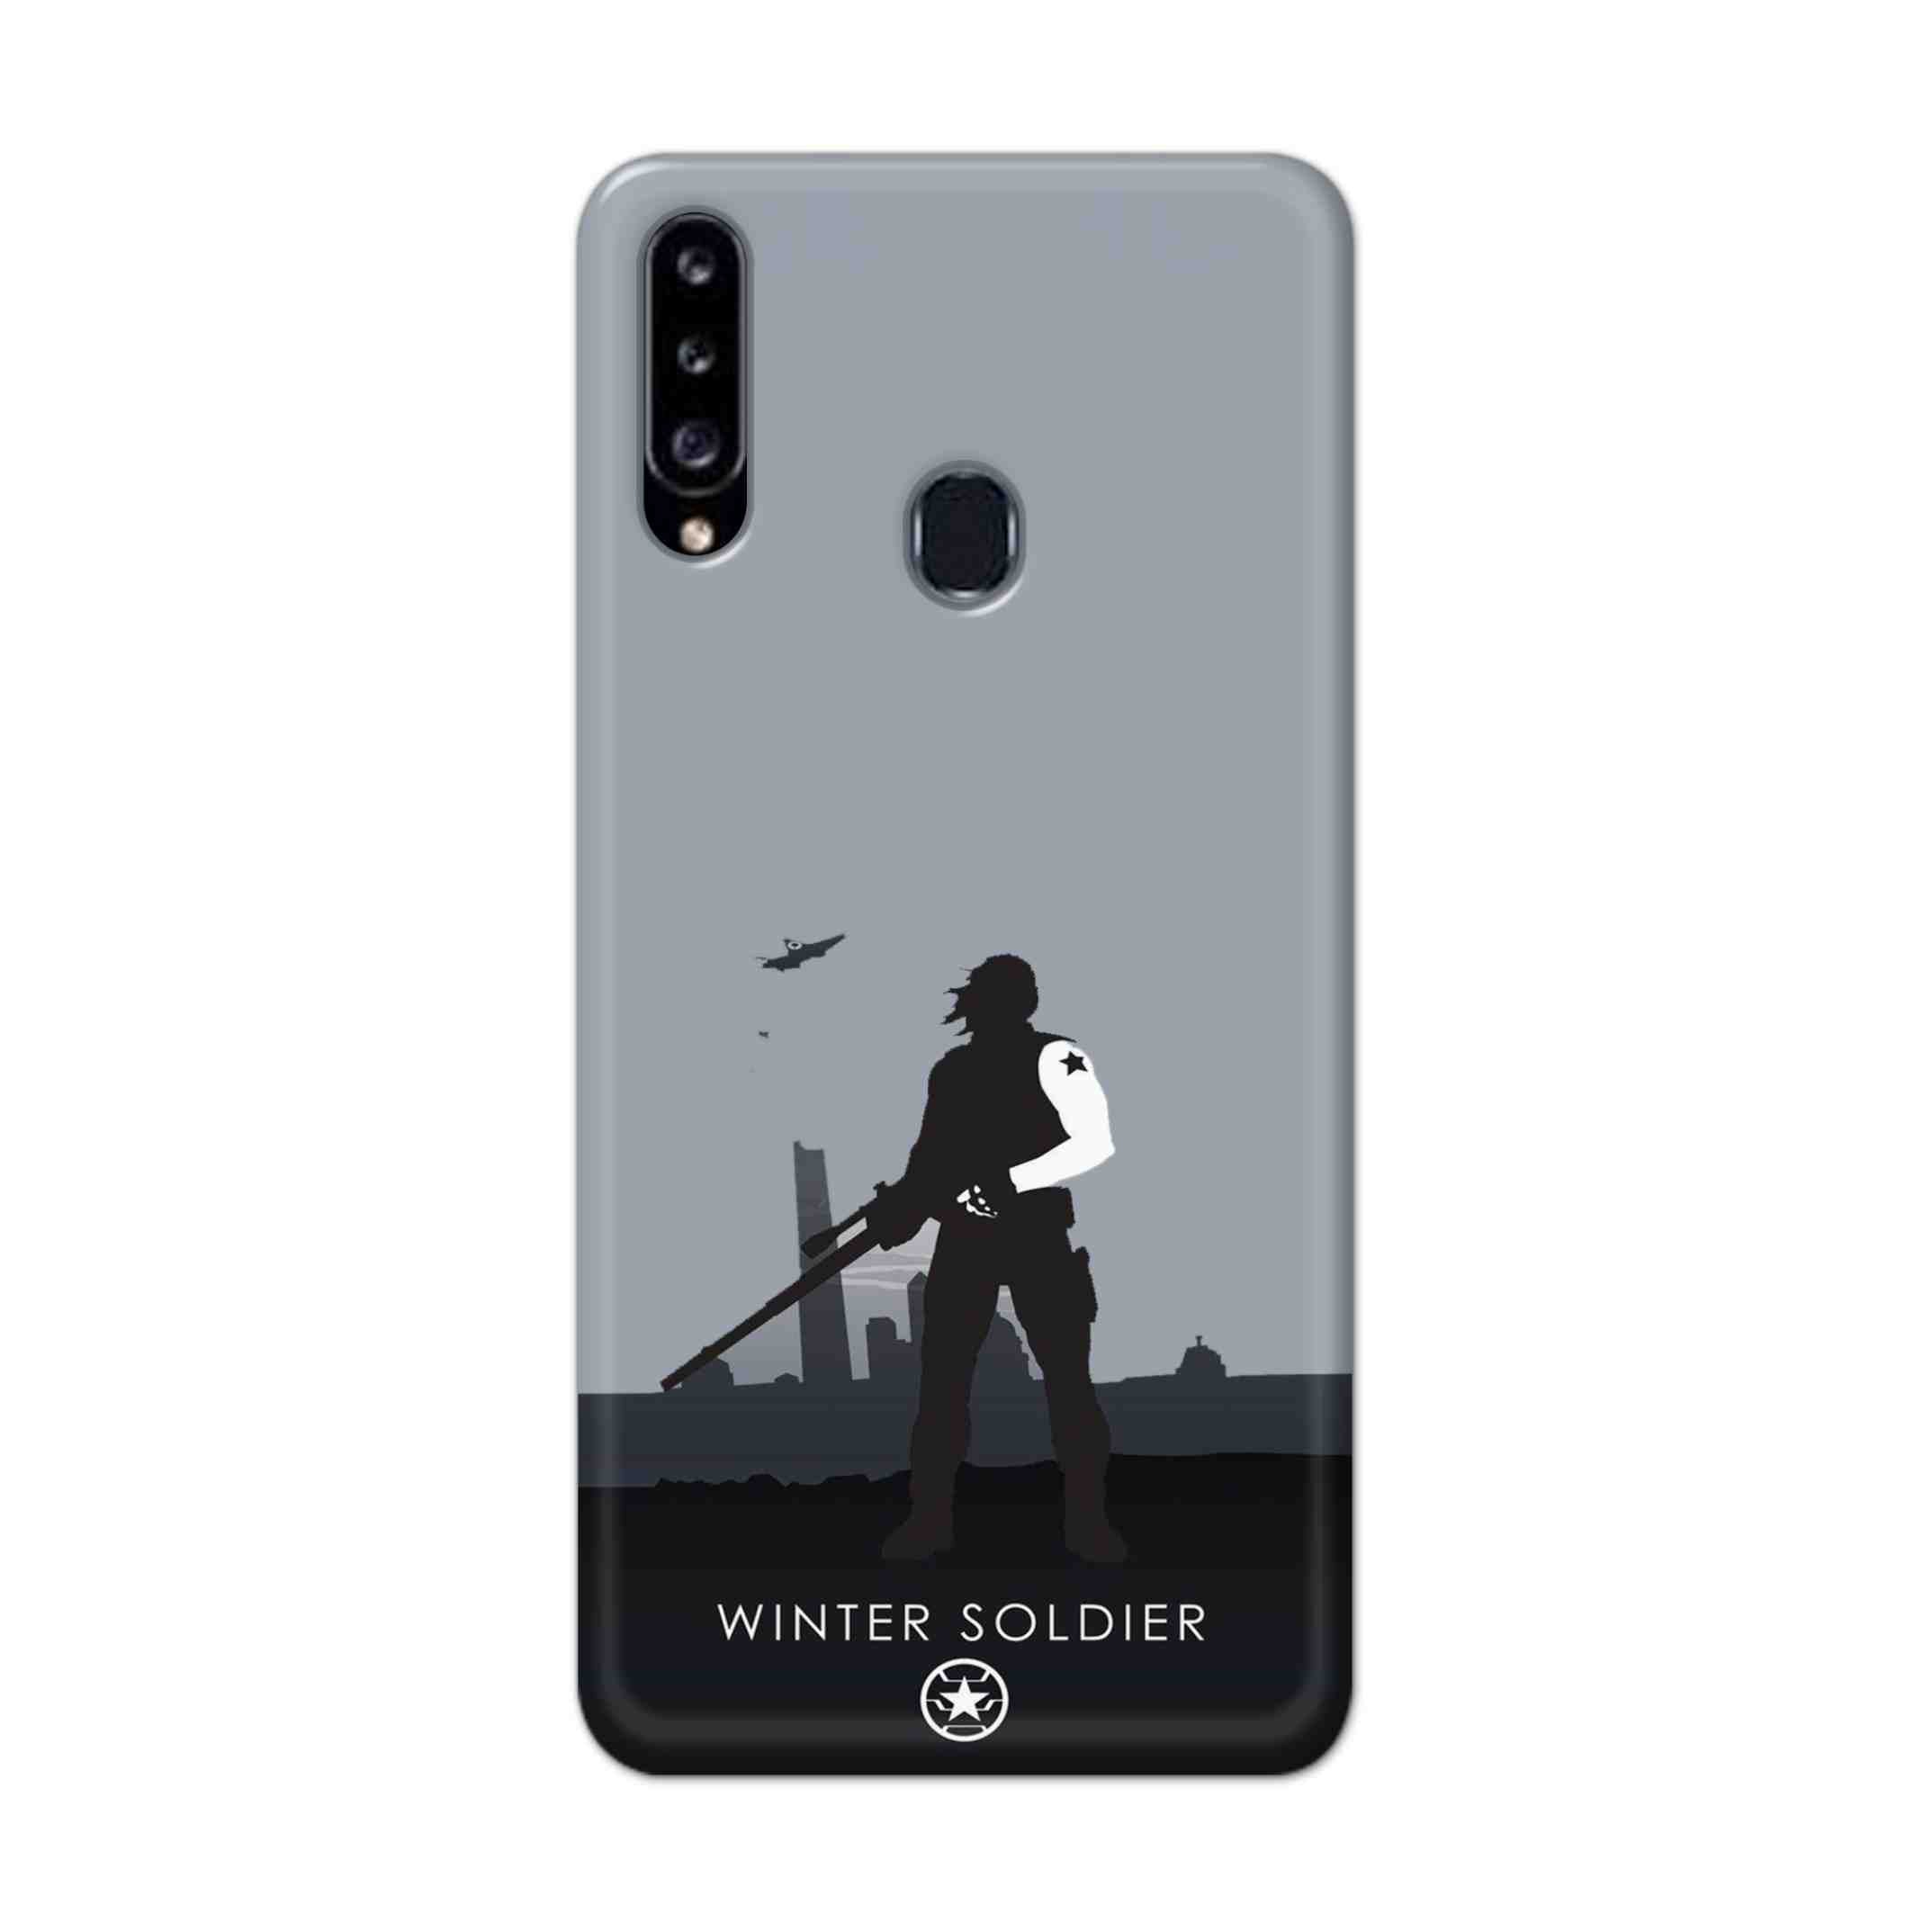 Buy Winter Soldier Hard Back Mobile Phone Case Cover For Samsung Galaxy A21 Online